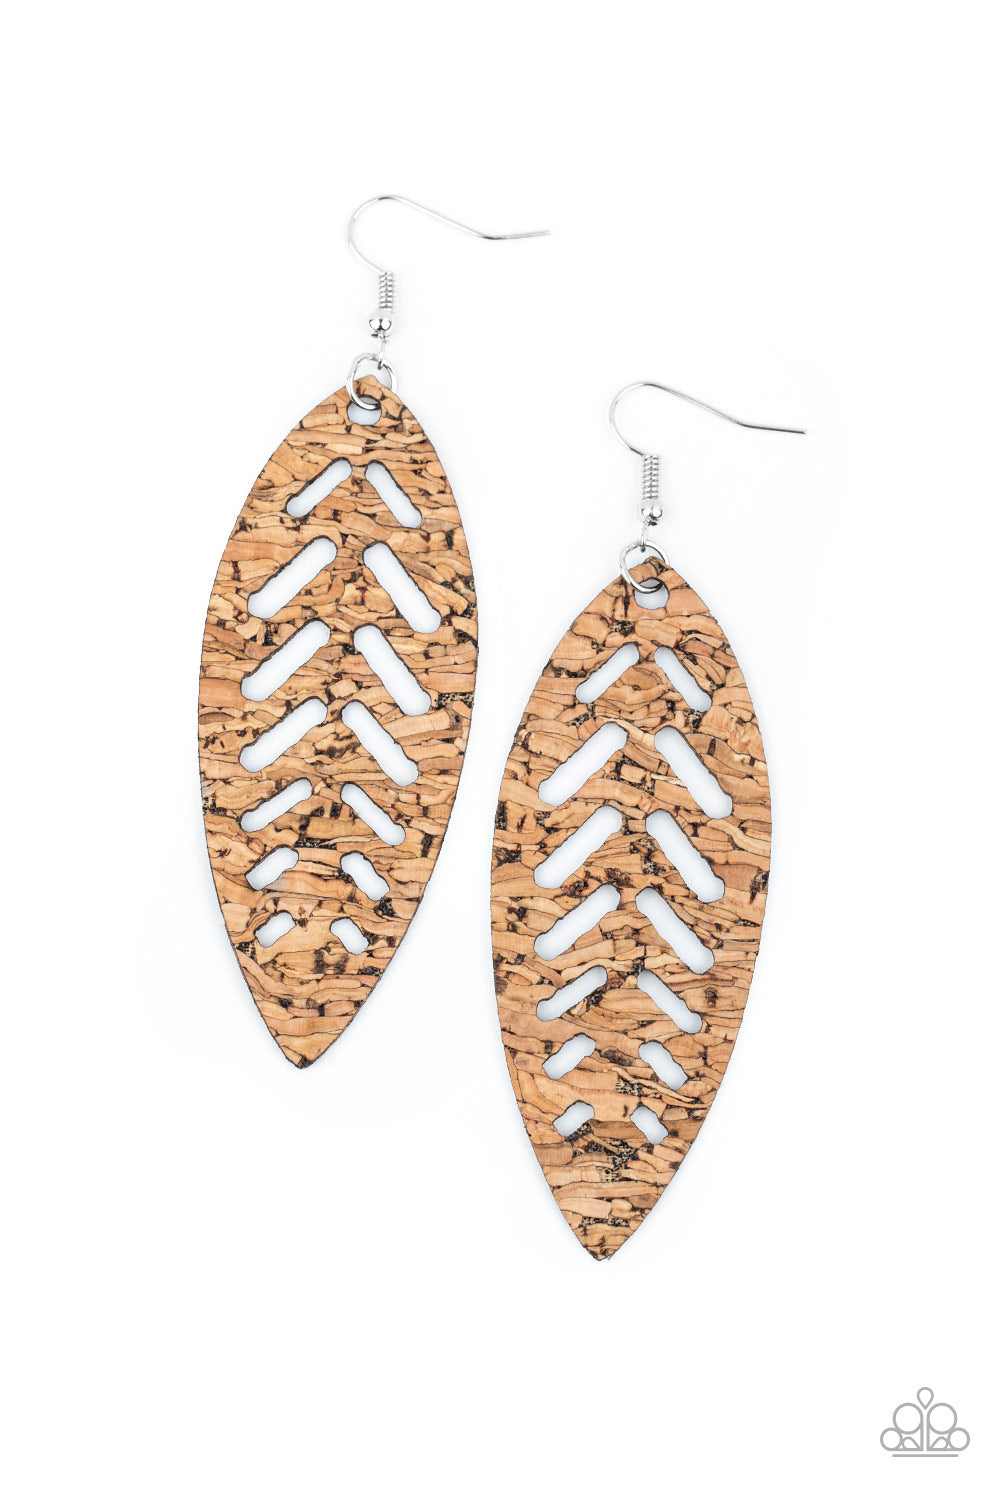 YOURE SUCH A CORK - BROWN LEAF CUT OUT ULTRA LIGHT WEIGHT NATURAL EARRINGS